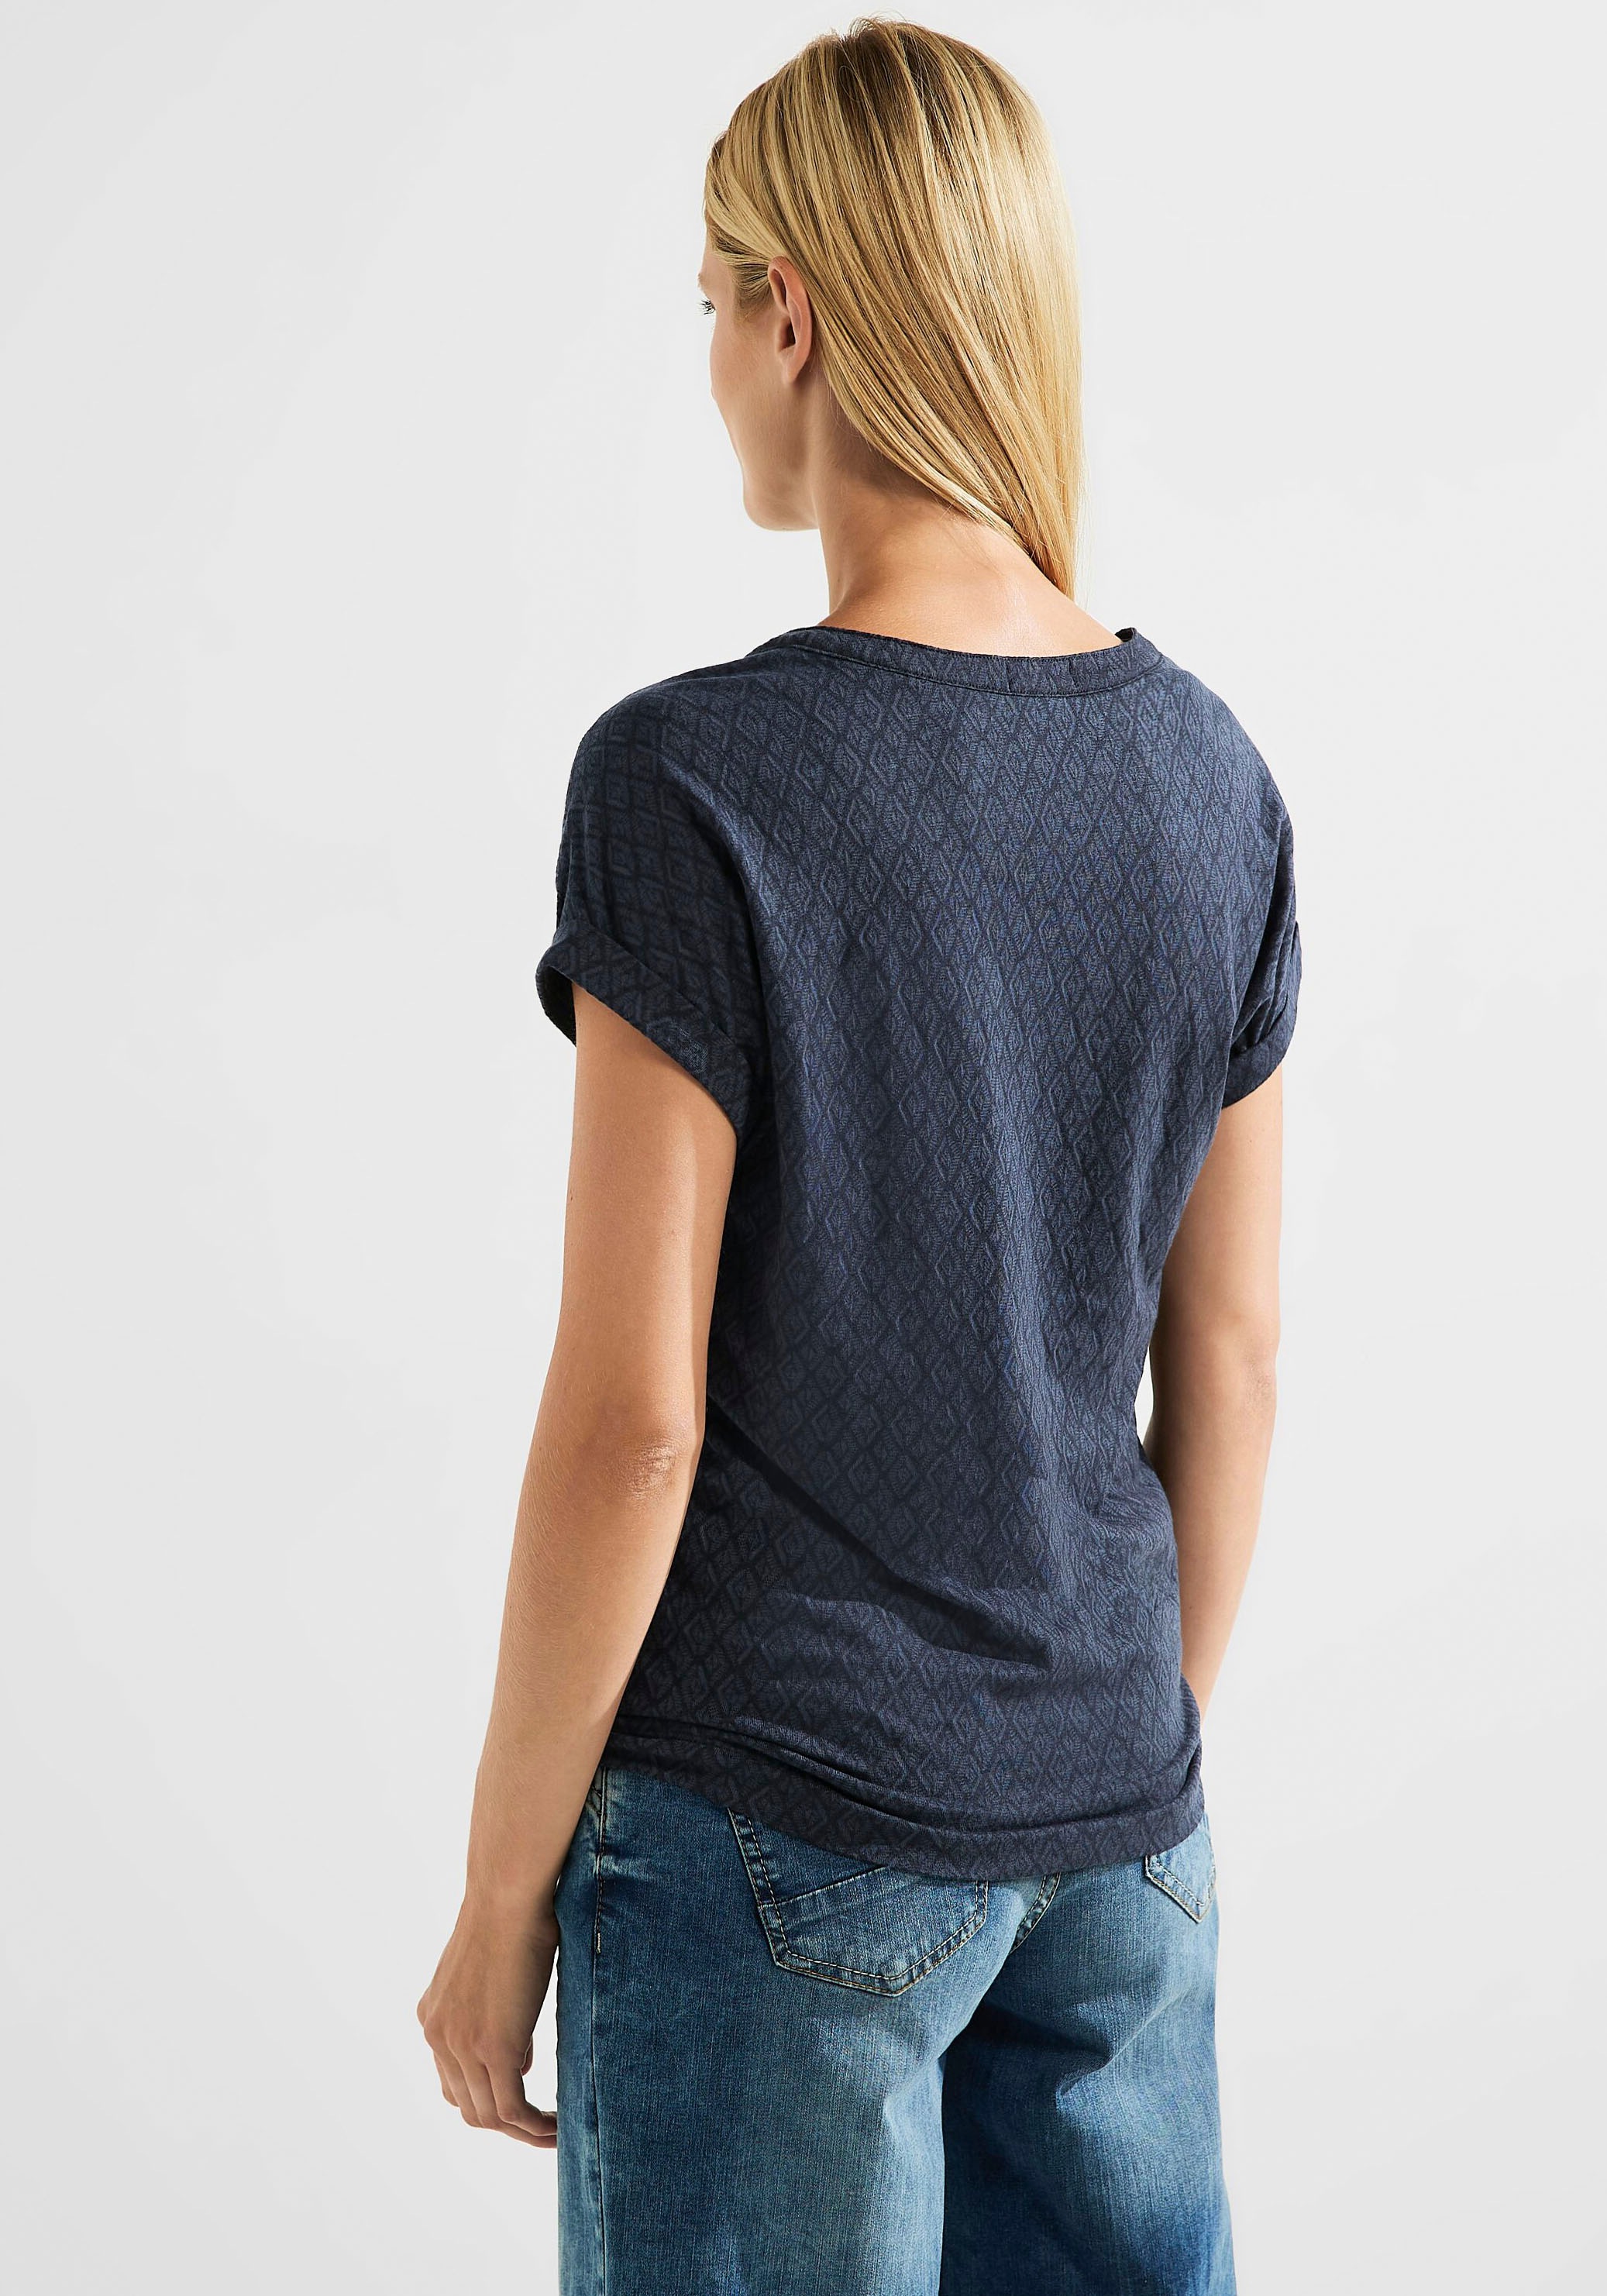 in online bei T-Shirt, mit Allover-Muster OTTO Rhombusform Cecil